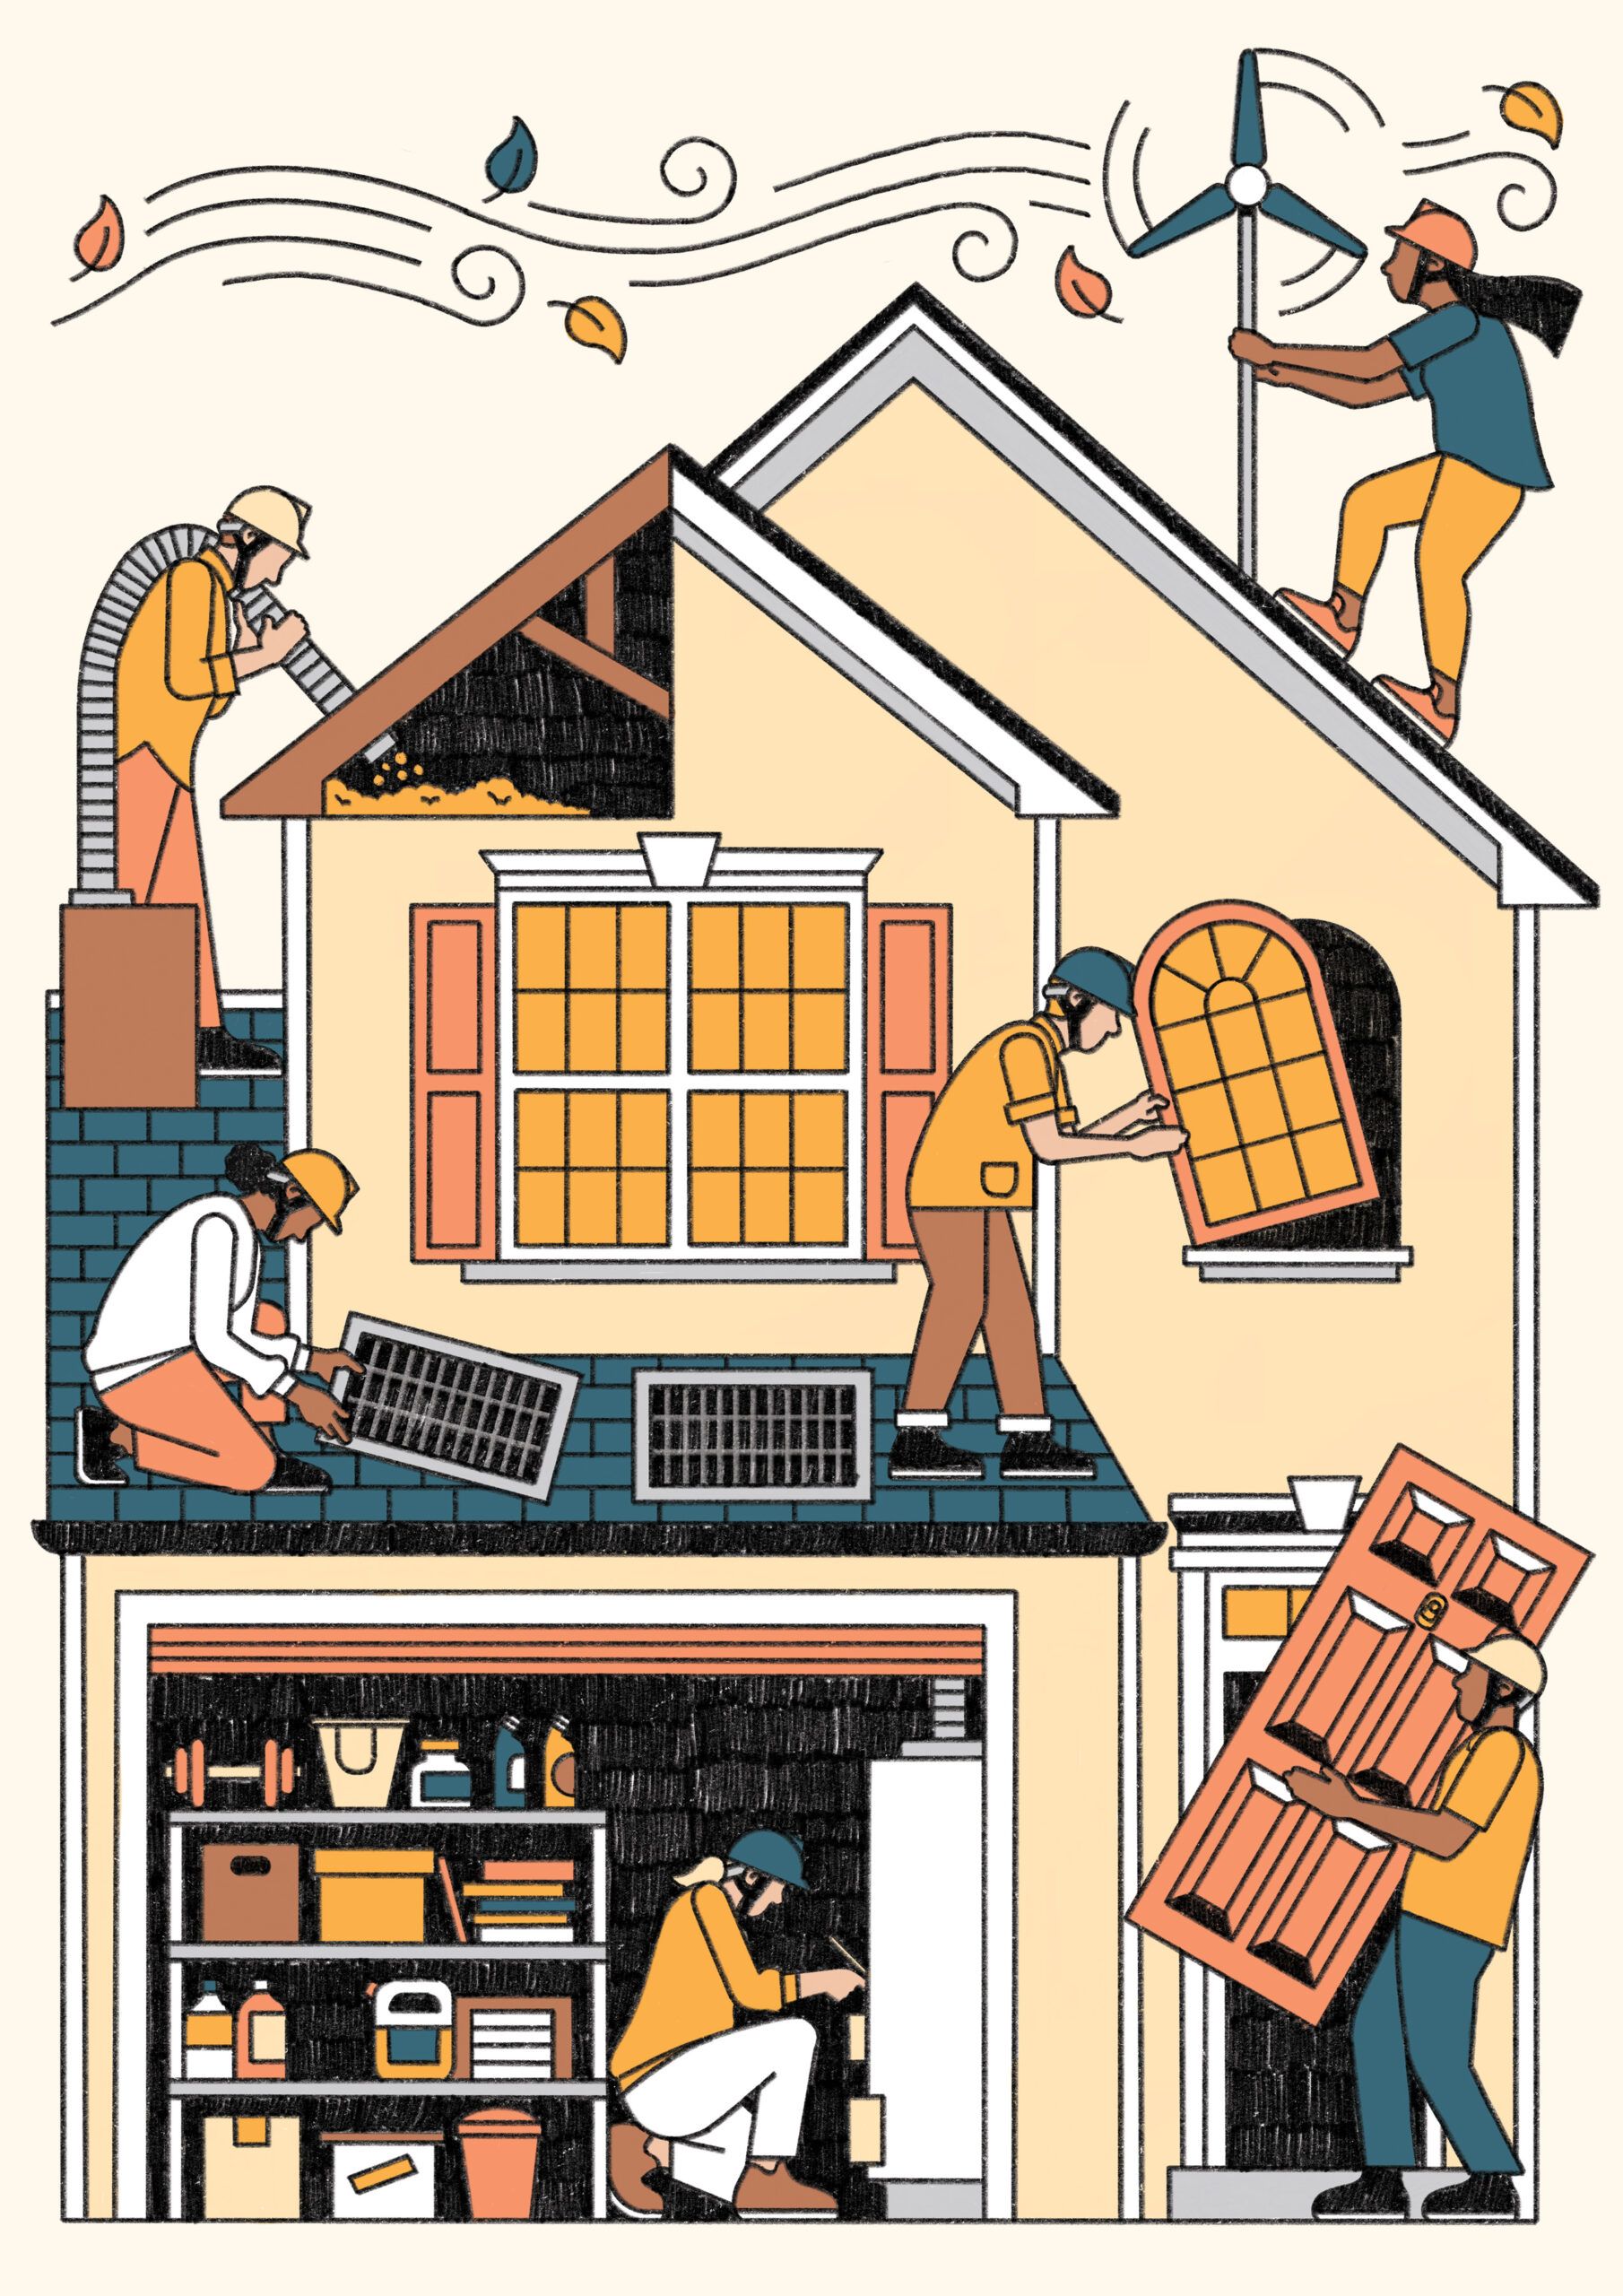 Illustration of people working on a house